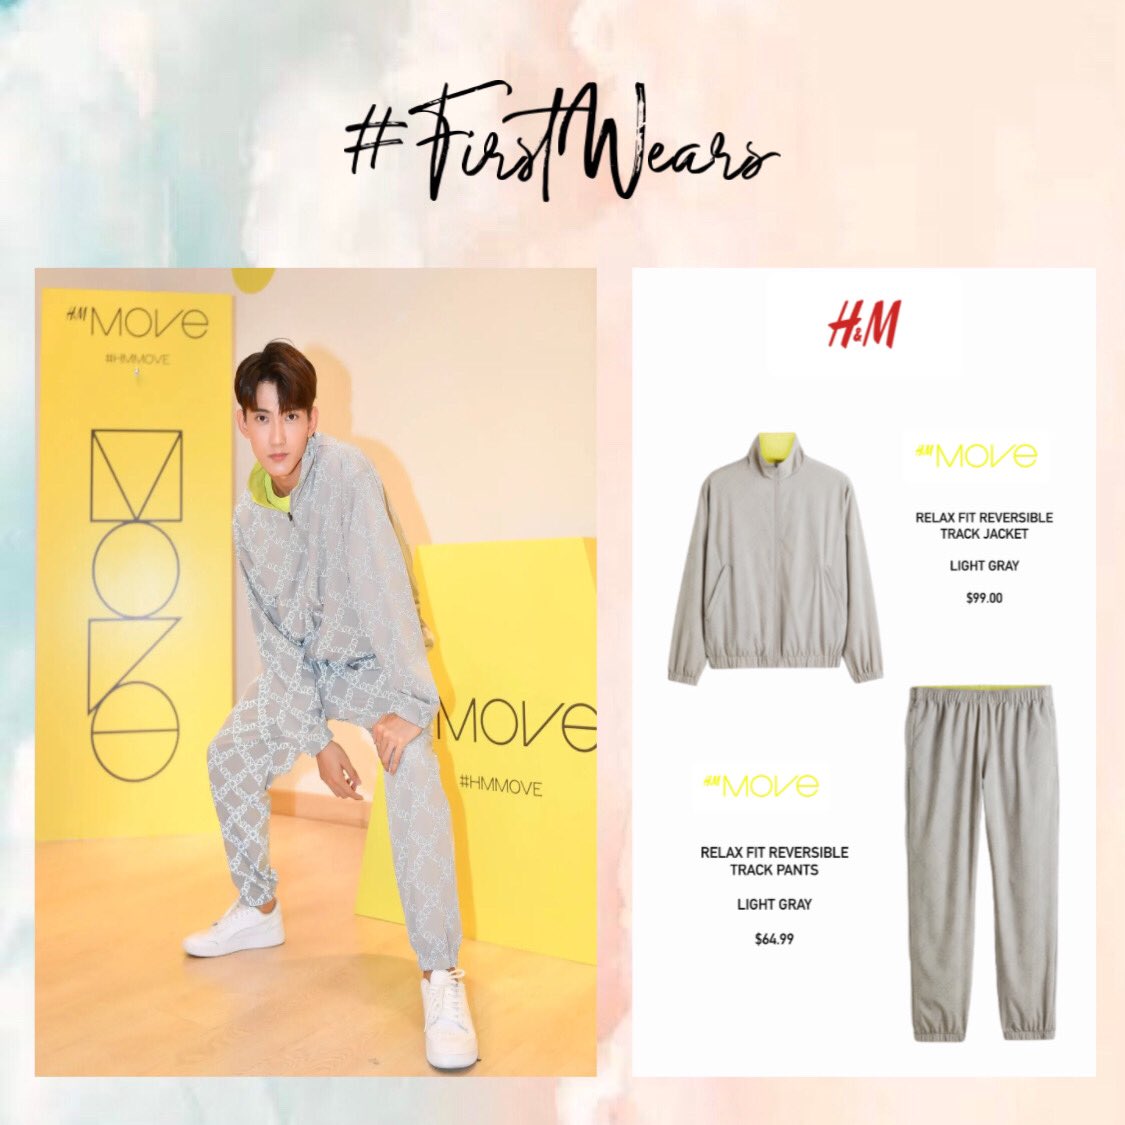 #FirstWears H&M 🧡

Relax Fit Reversible Track Jacket - Light Gray

Relax Fit Reversible Track Pants - Light Gray

Date Seen:
08.06.2022 @ @firstfh5 instagram update

📸 @firstfh5 & @hm 

#JaFirst #First_Chalongrat #HMmove #จาเฟริสท์